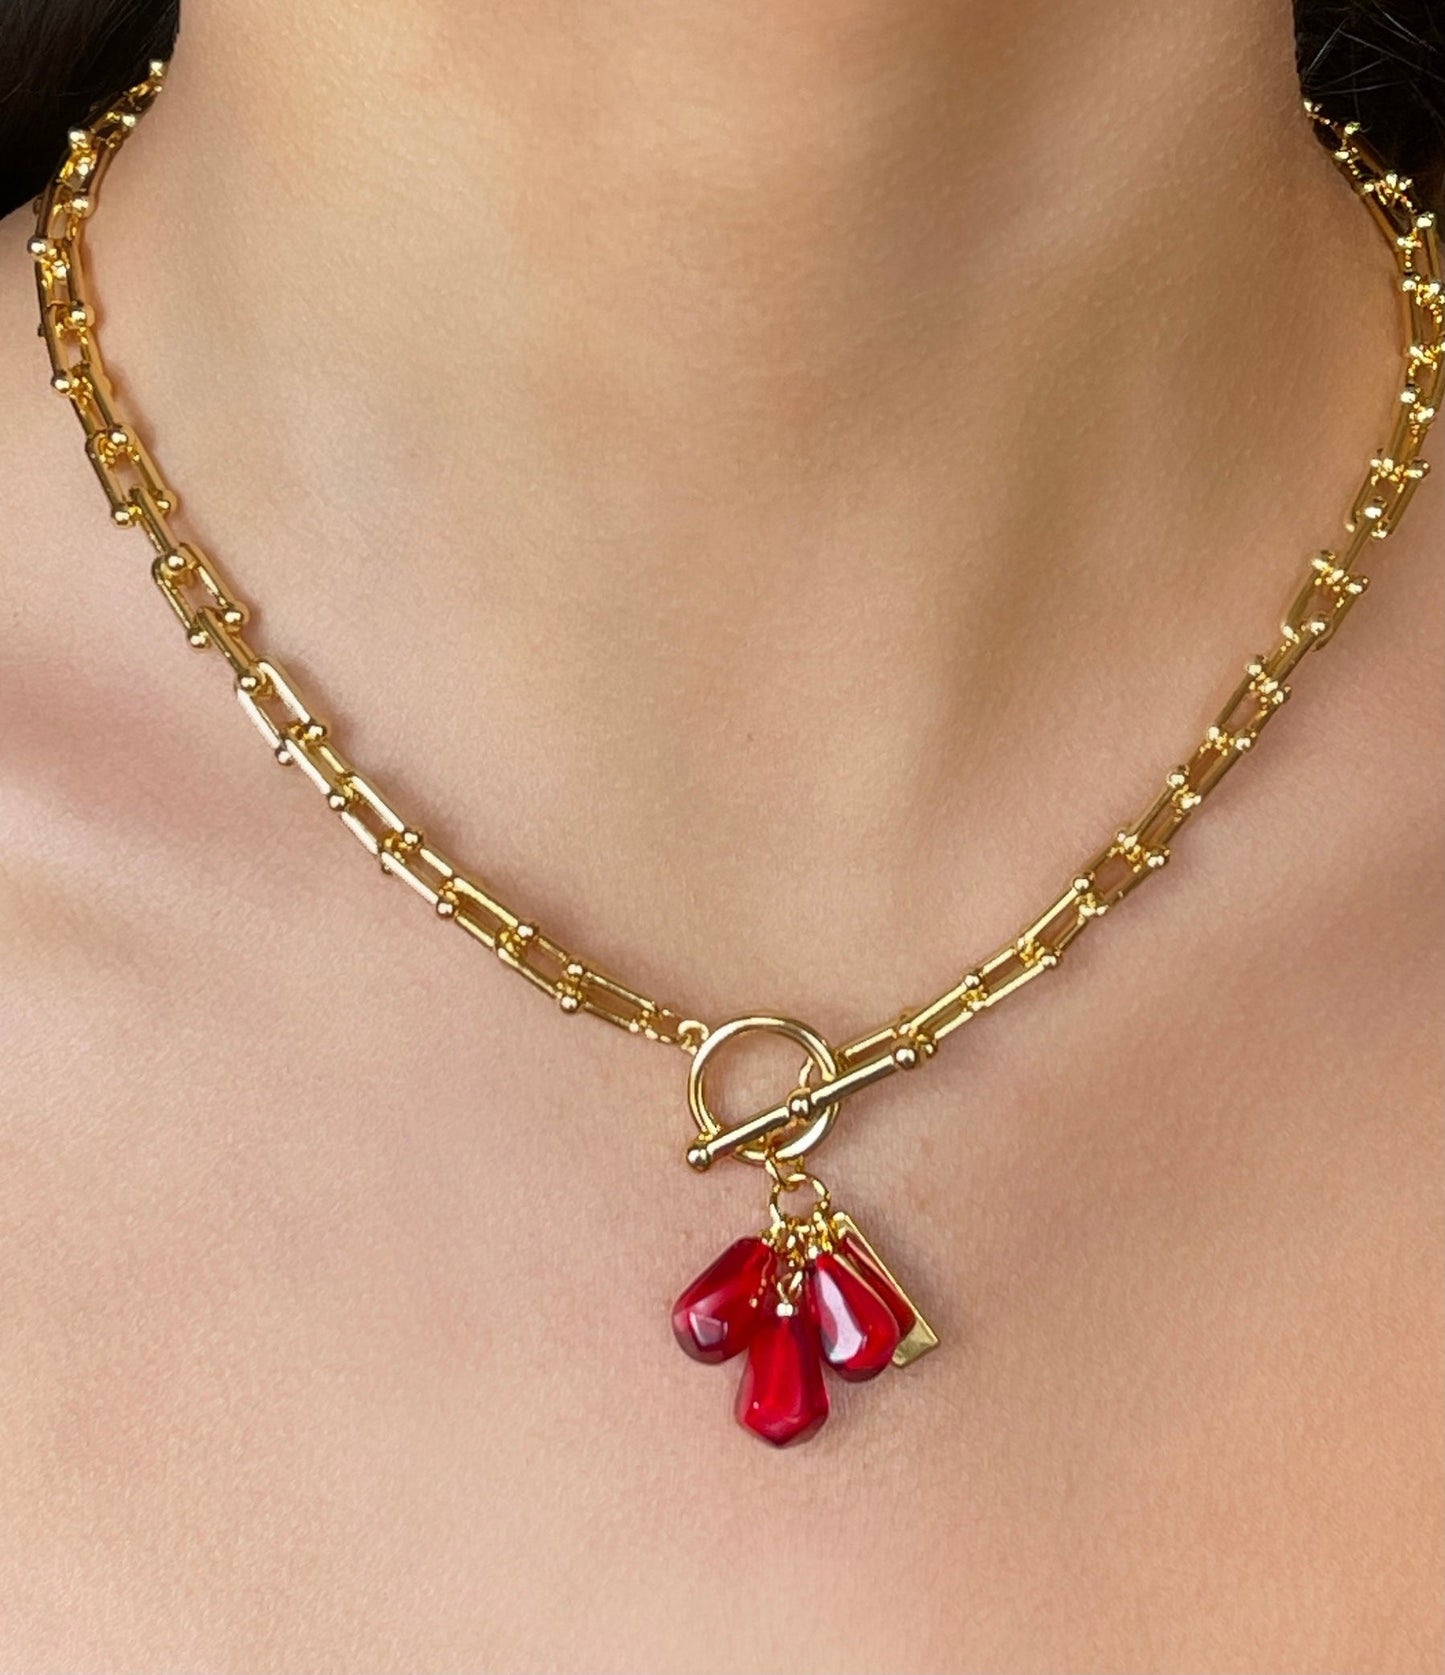 Pomegranate Seeds Necklace in Gold & Red